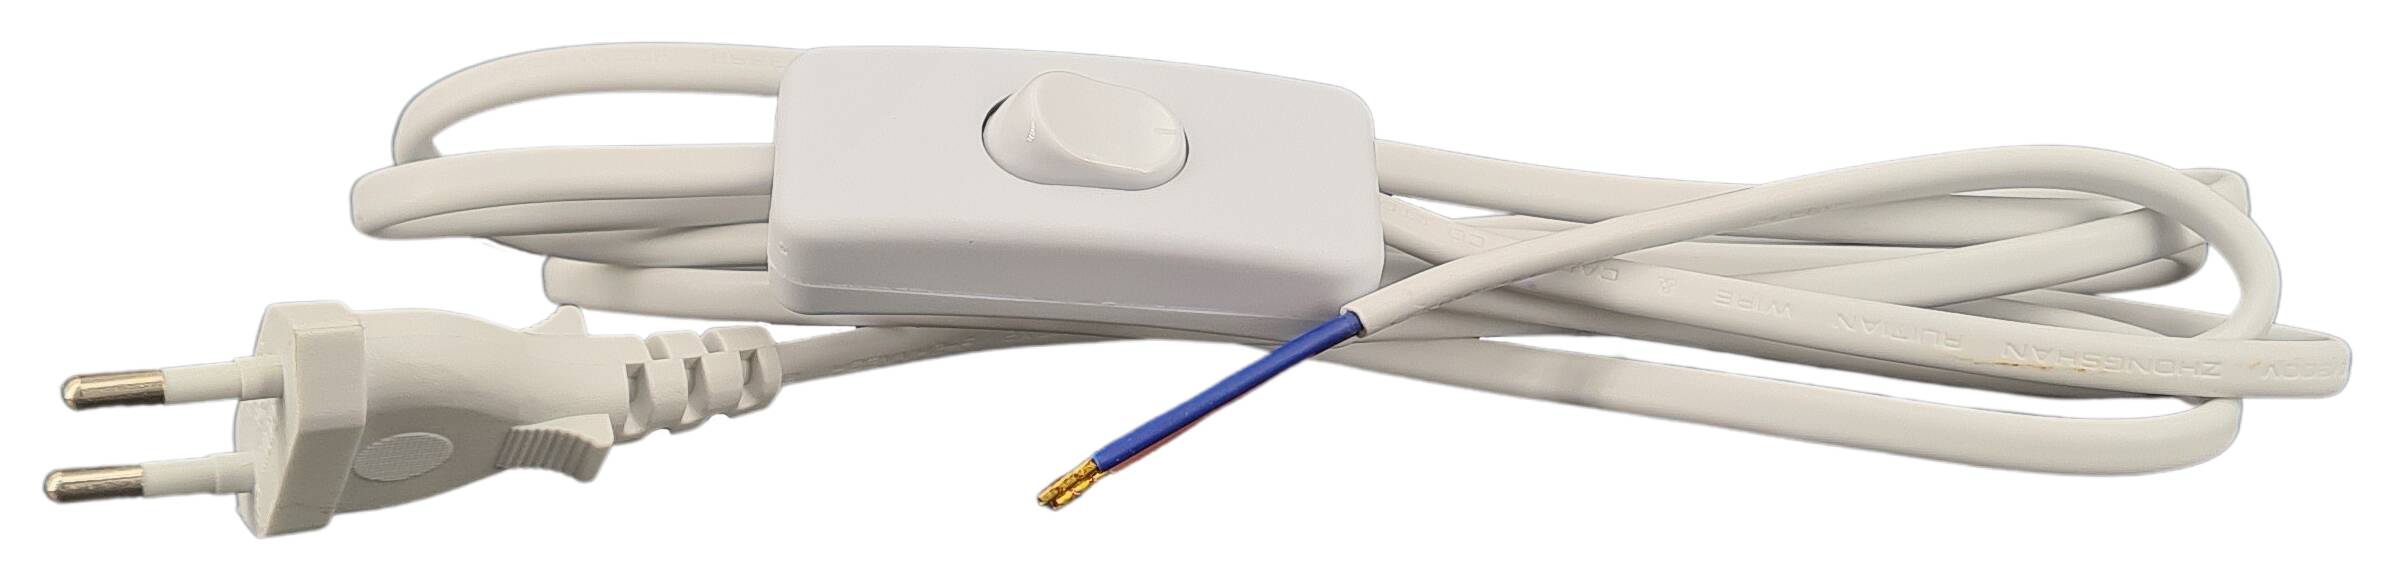 cord-set 2x0,75/2000/800 flat with Euro plug and intermediate switch white, single packed with customer label